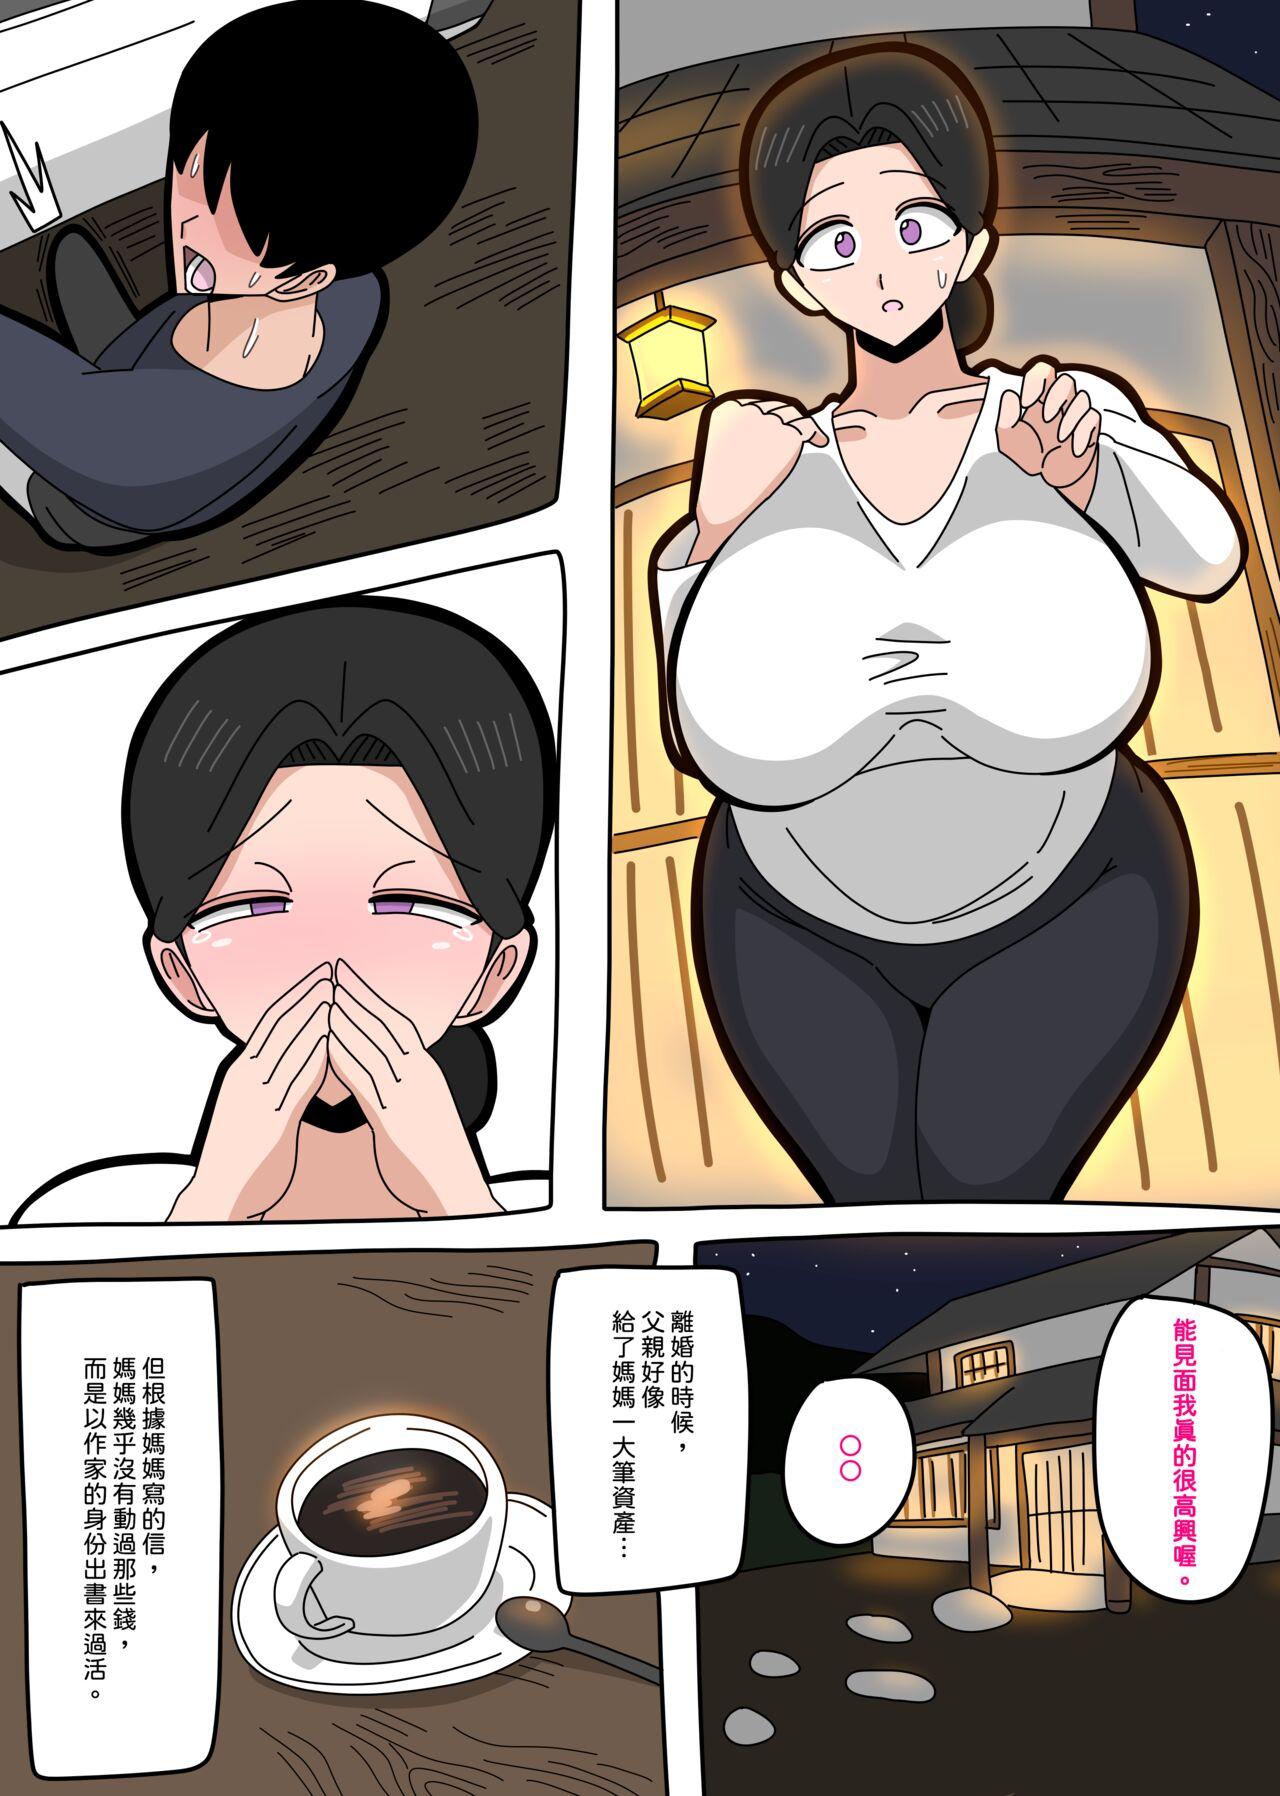 Latex [18master] 2023-5-24 Meeting mom again after a long separation | 與媽媽重逢… [Chinese][興趣使然的個人機翻] - Original Ghetto - Page 2